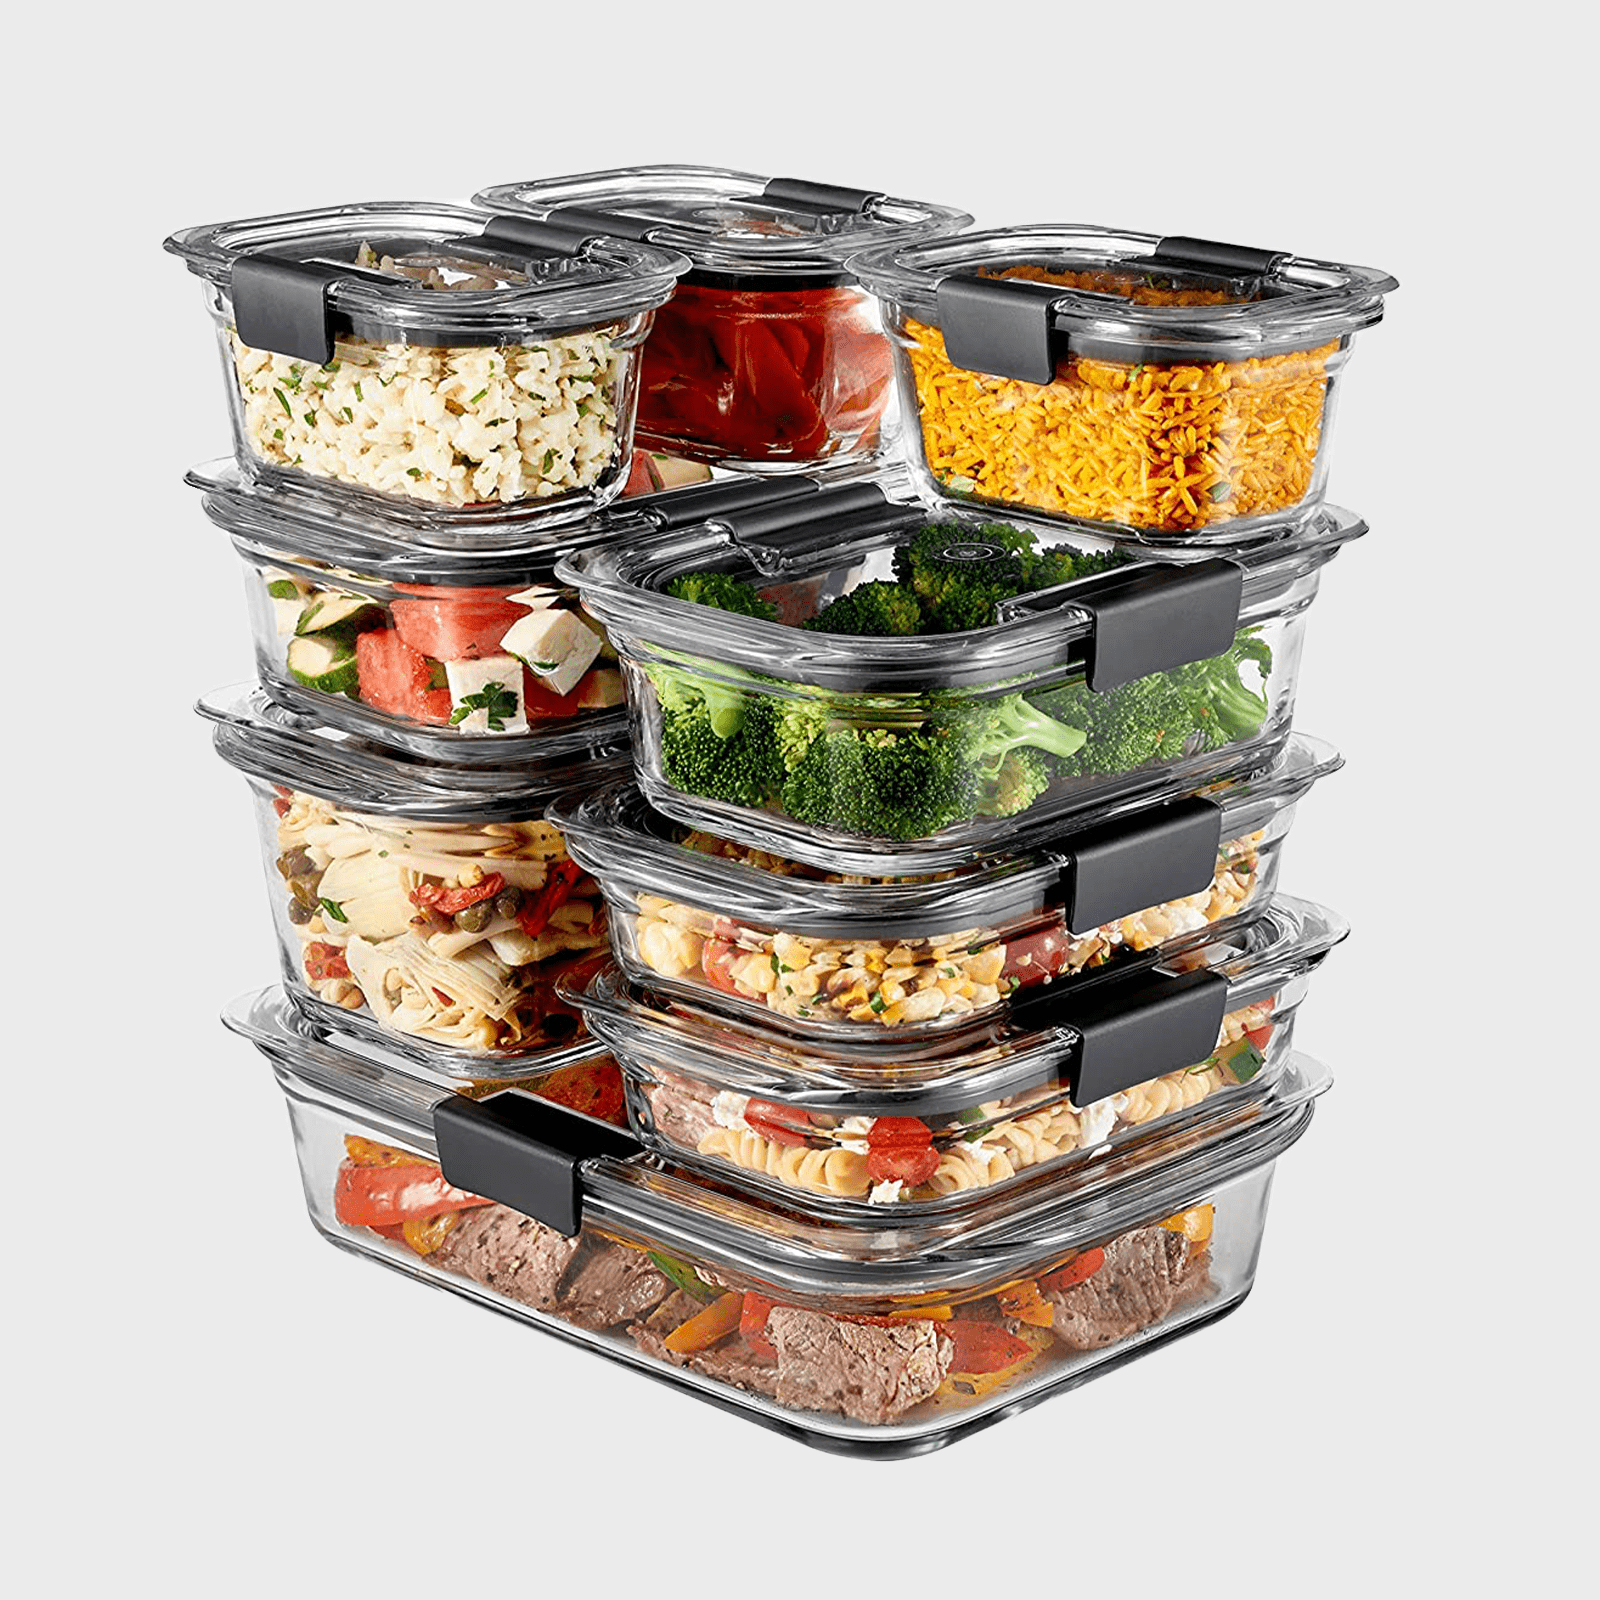 https://www.rd.com/wp-content/uploads/2022/10/rubbermaid-brilliance-glass-storage-food-containers-ecomm-via-amazon.com_.png?fit=700%2C700